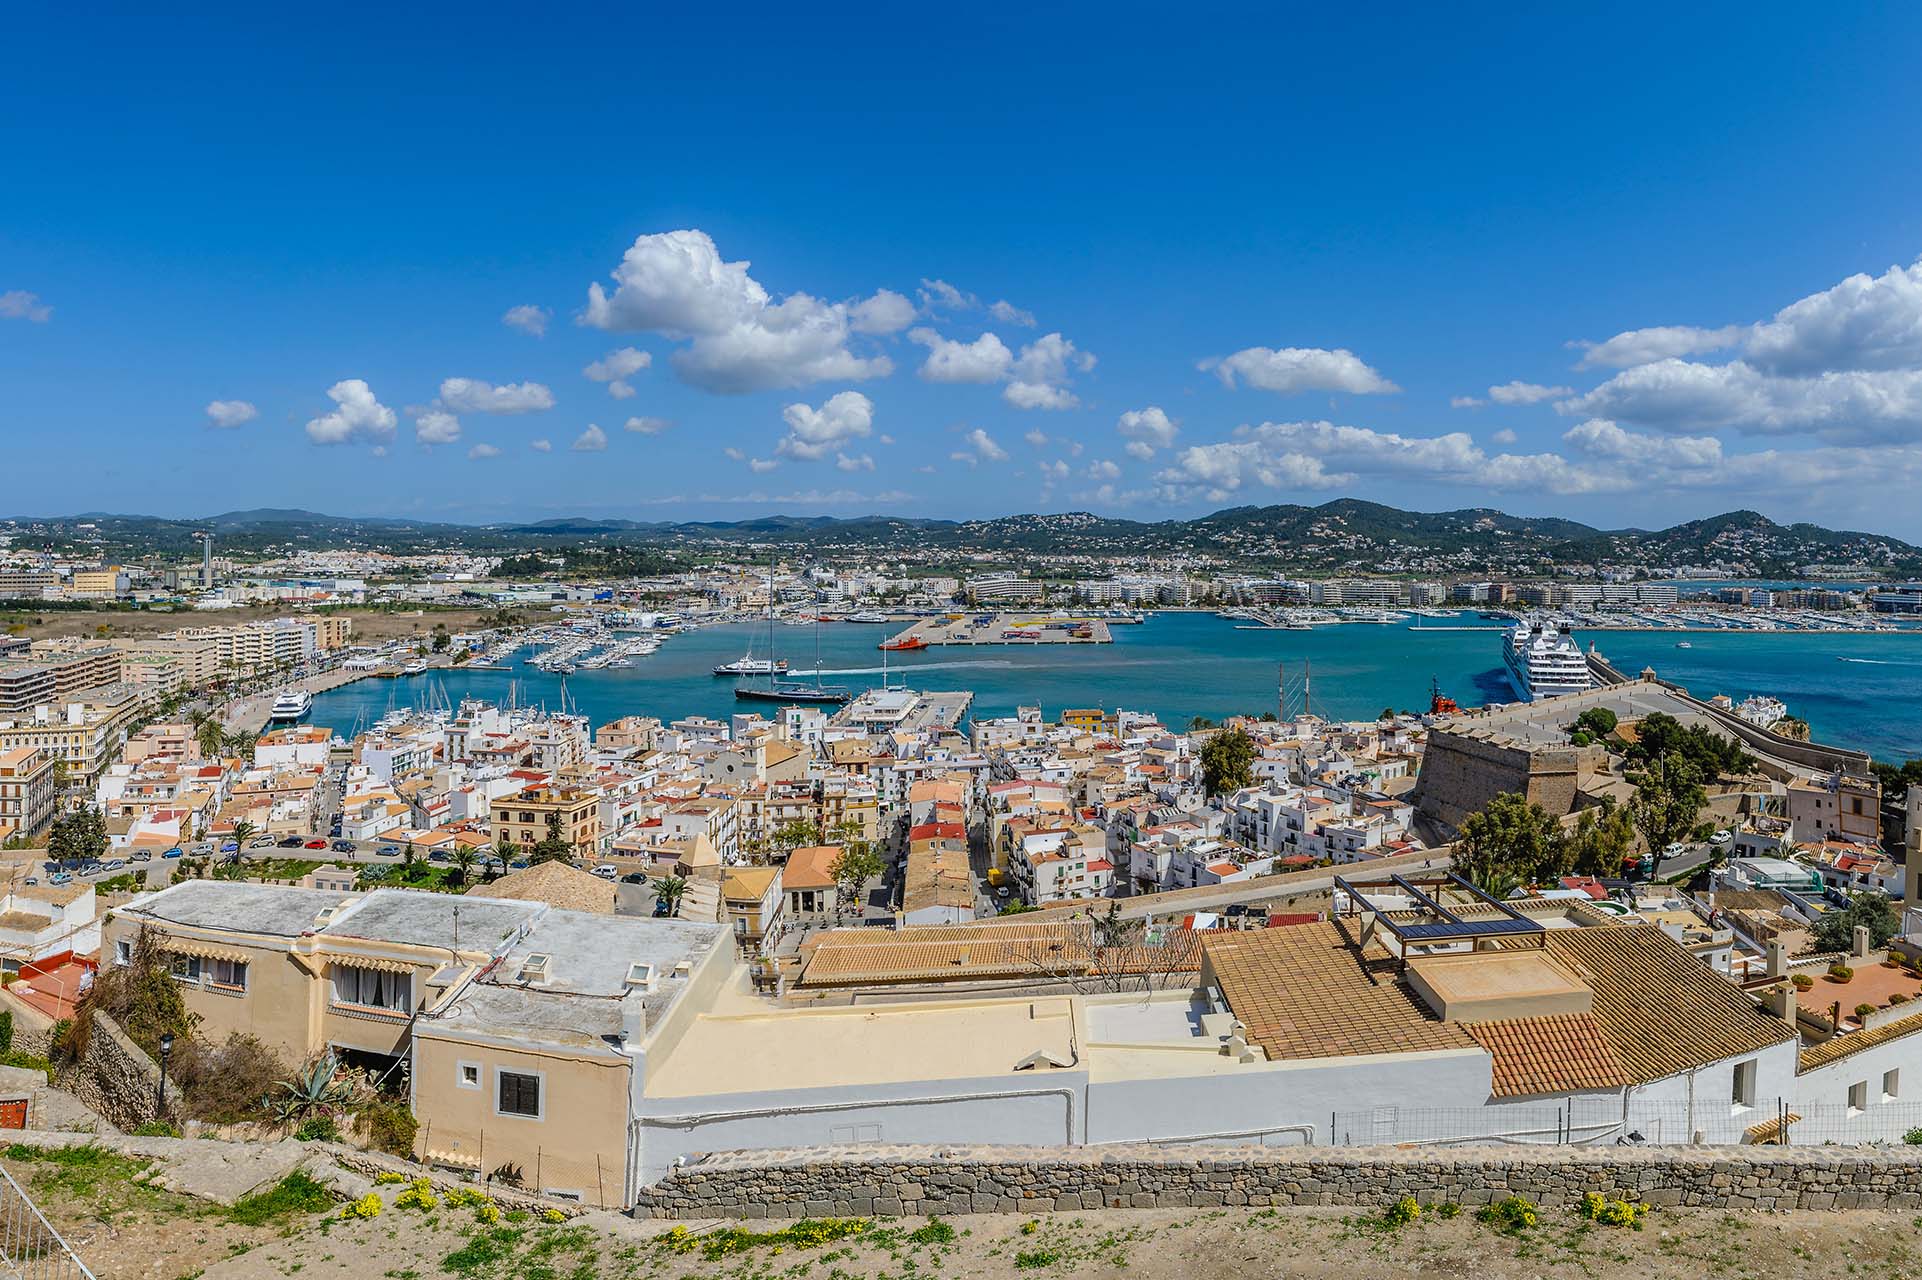 Get to know Ibiza